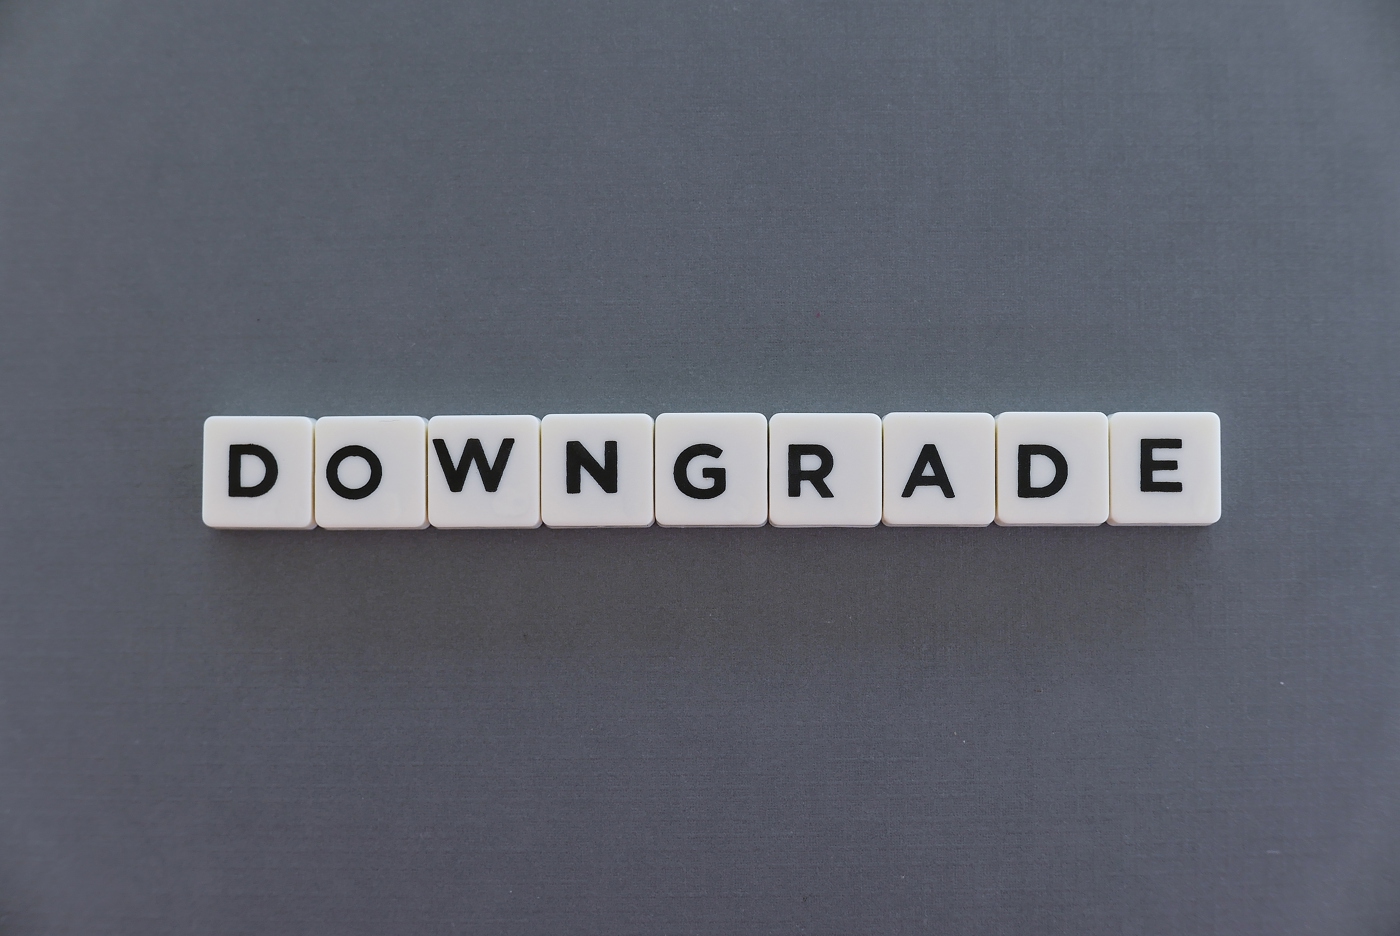 Analyst downgrade, Stock downgrade, Stock rating, Analyst news, Sell rating